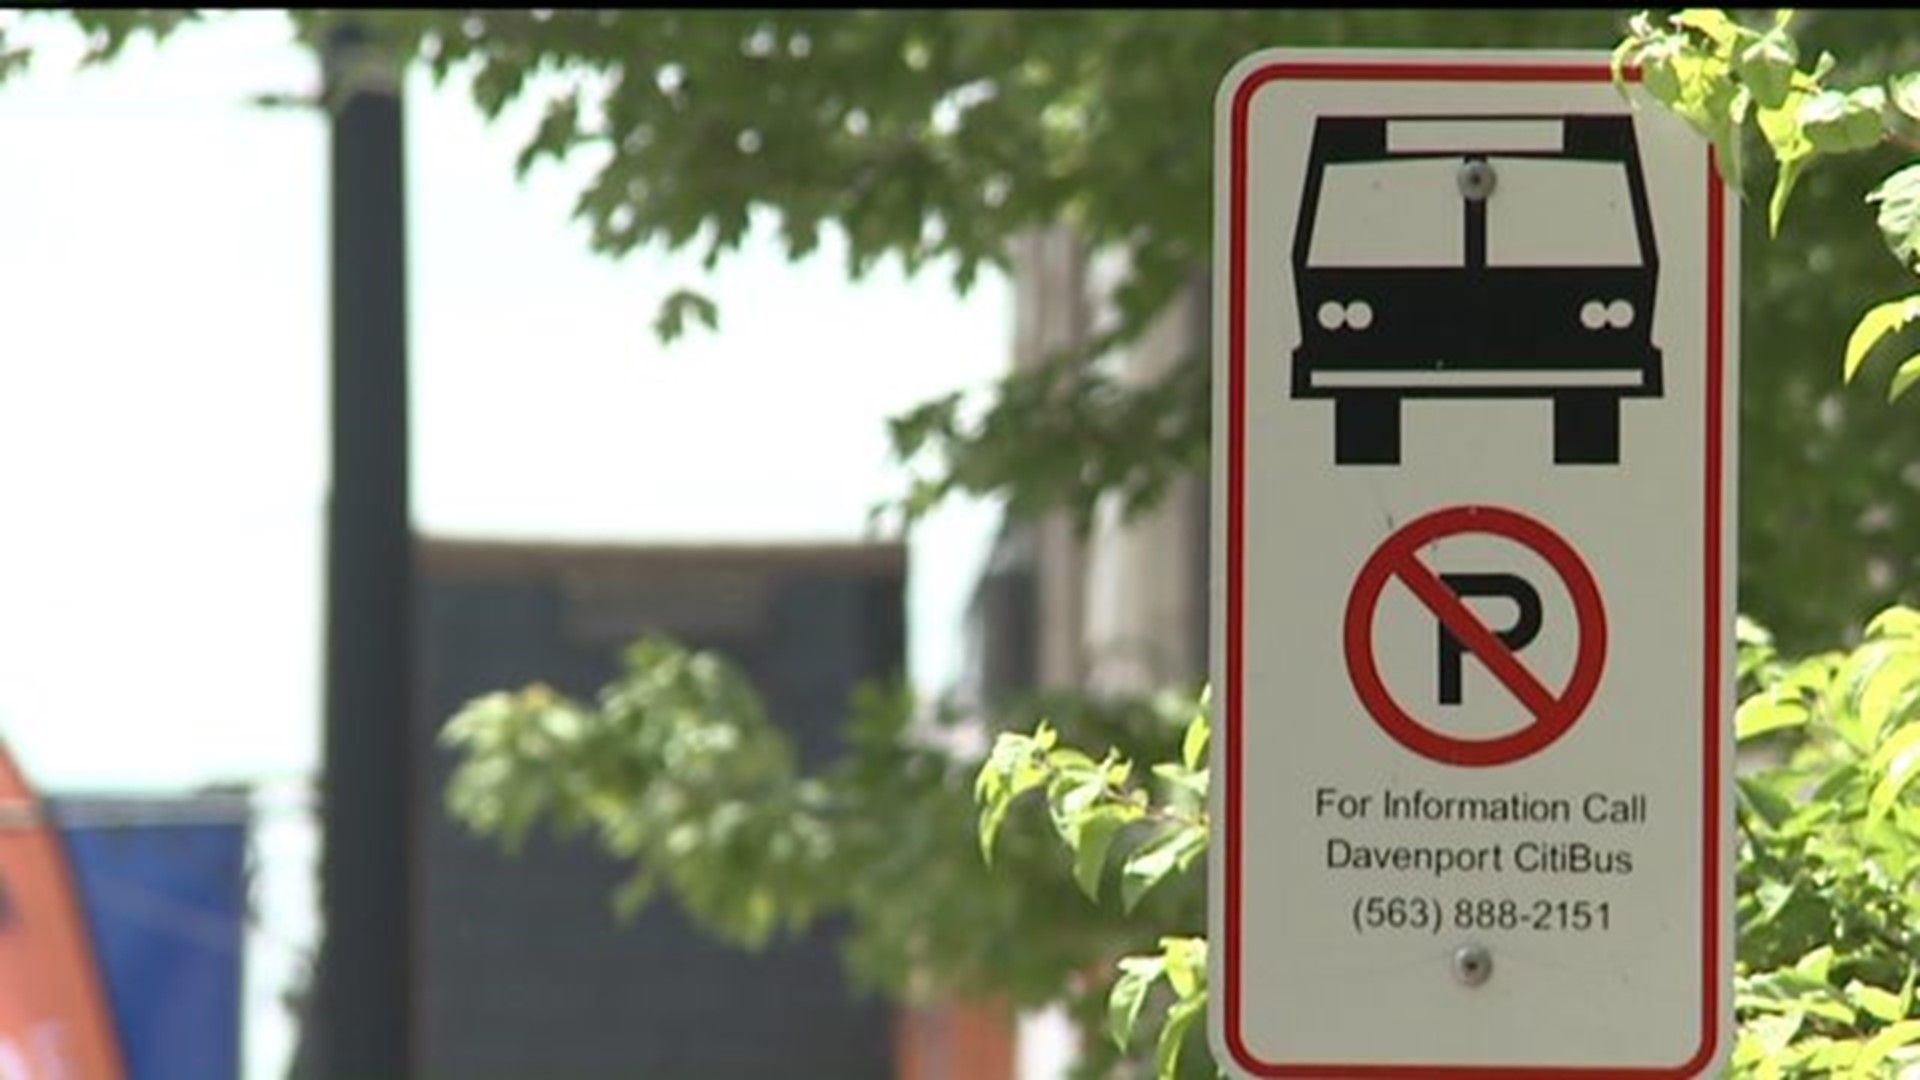 New CitBus rules for Davenport students